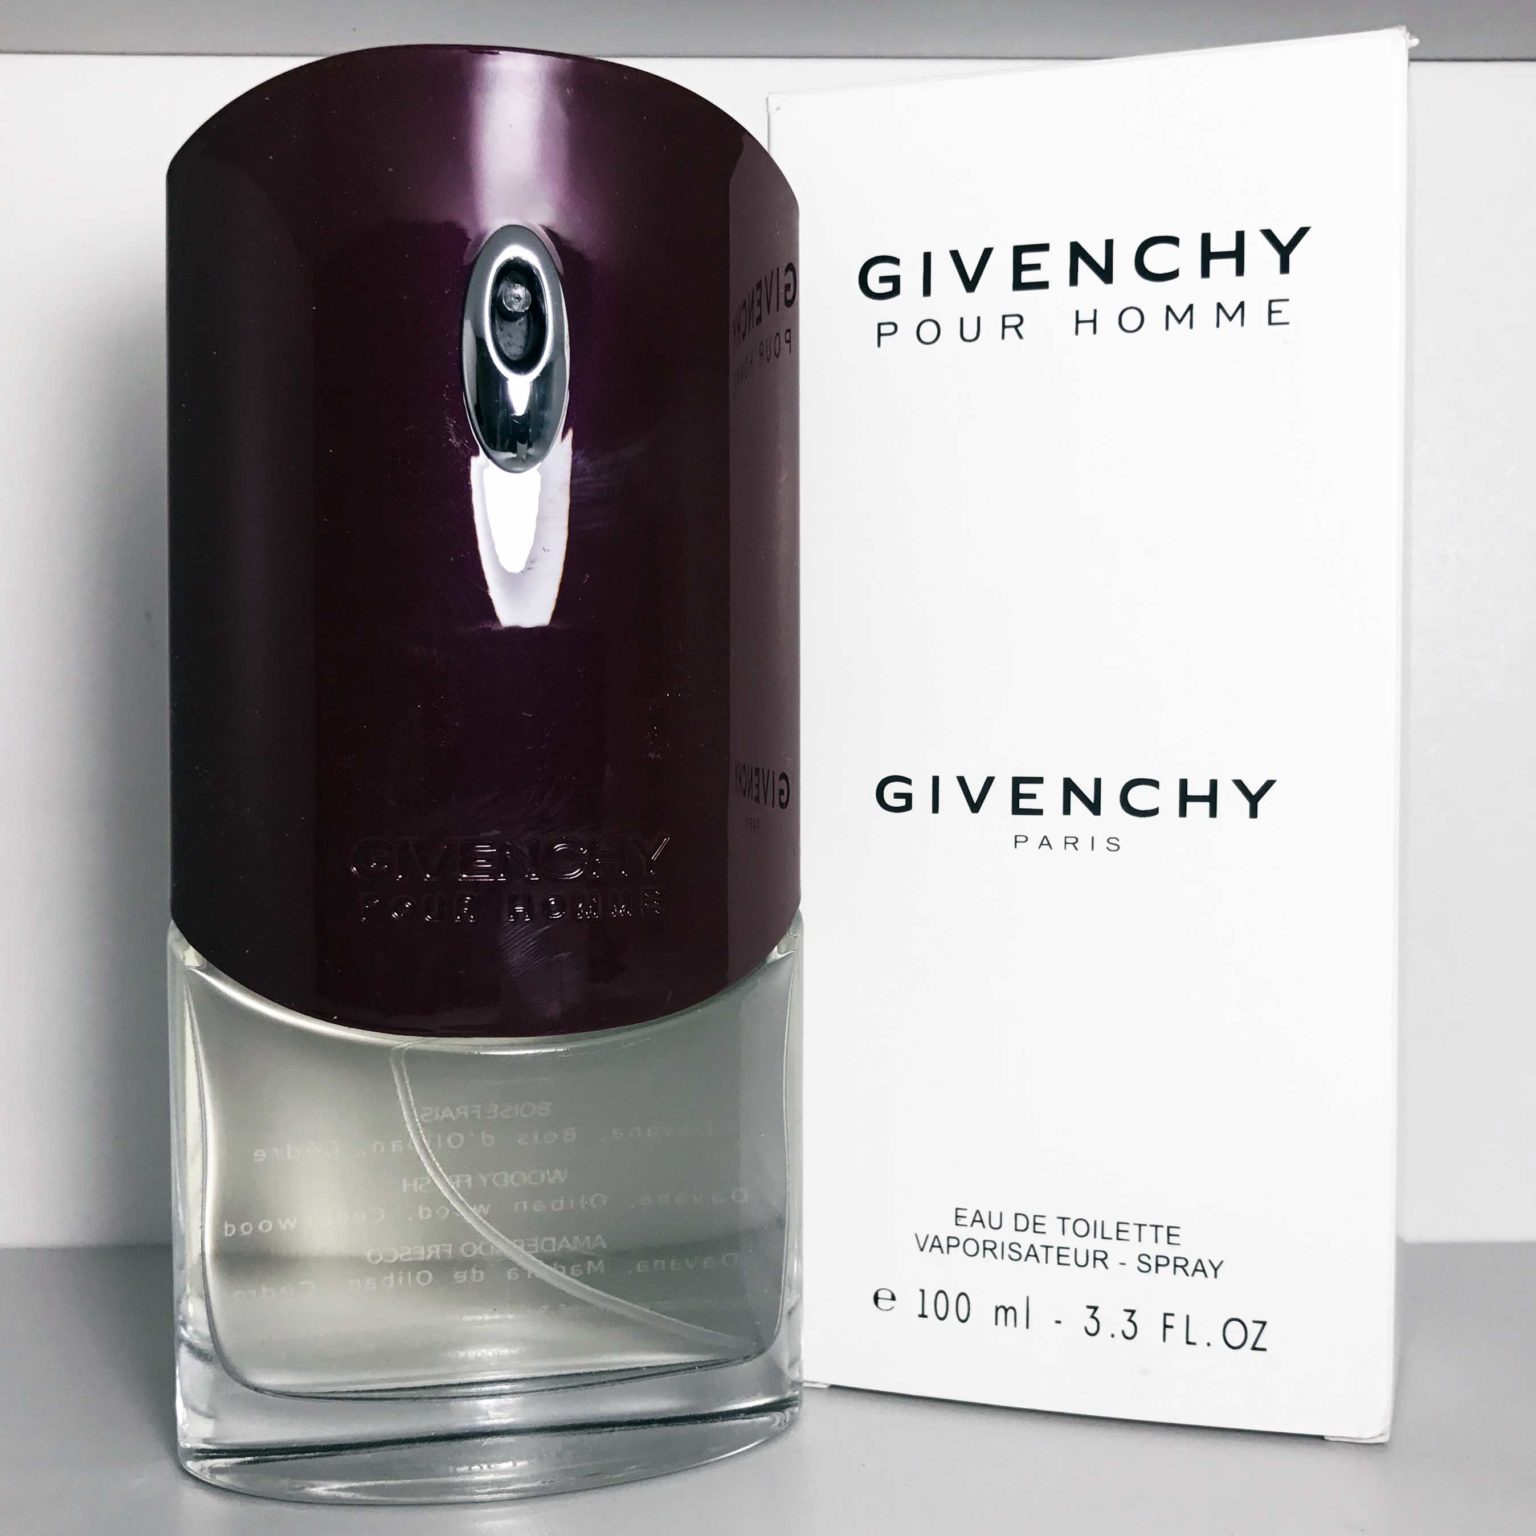 Туалетная вода givenchy pour homme. Givenchy pour homme тестер 100. Tester Givenchy pour homme 100 мл коробка. Парфюм Givenchy pour homme. Духи мужские Givenchy pour homme 50ml тестер.